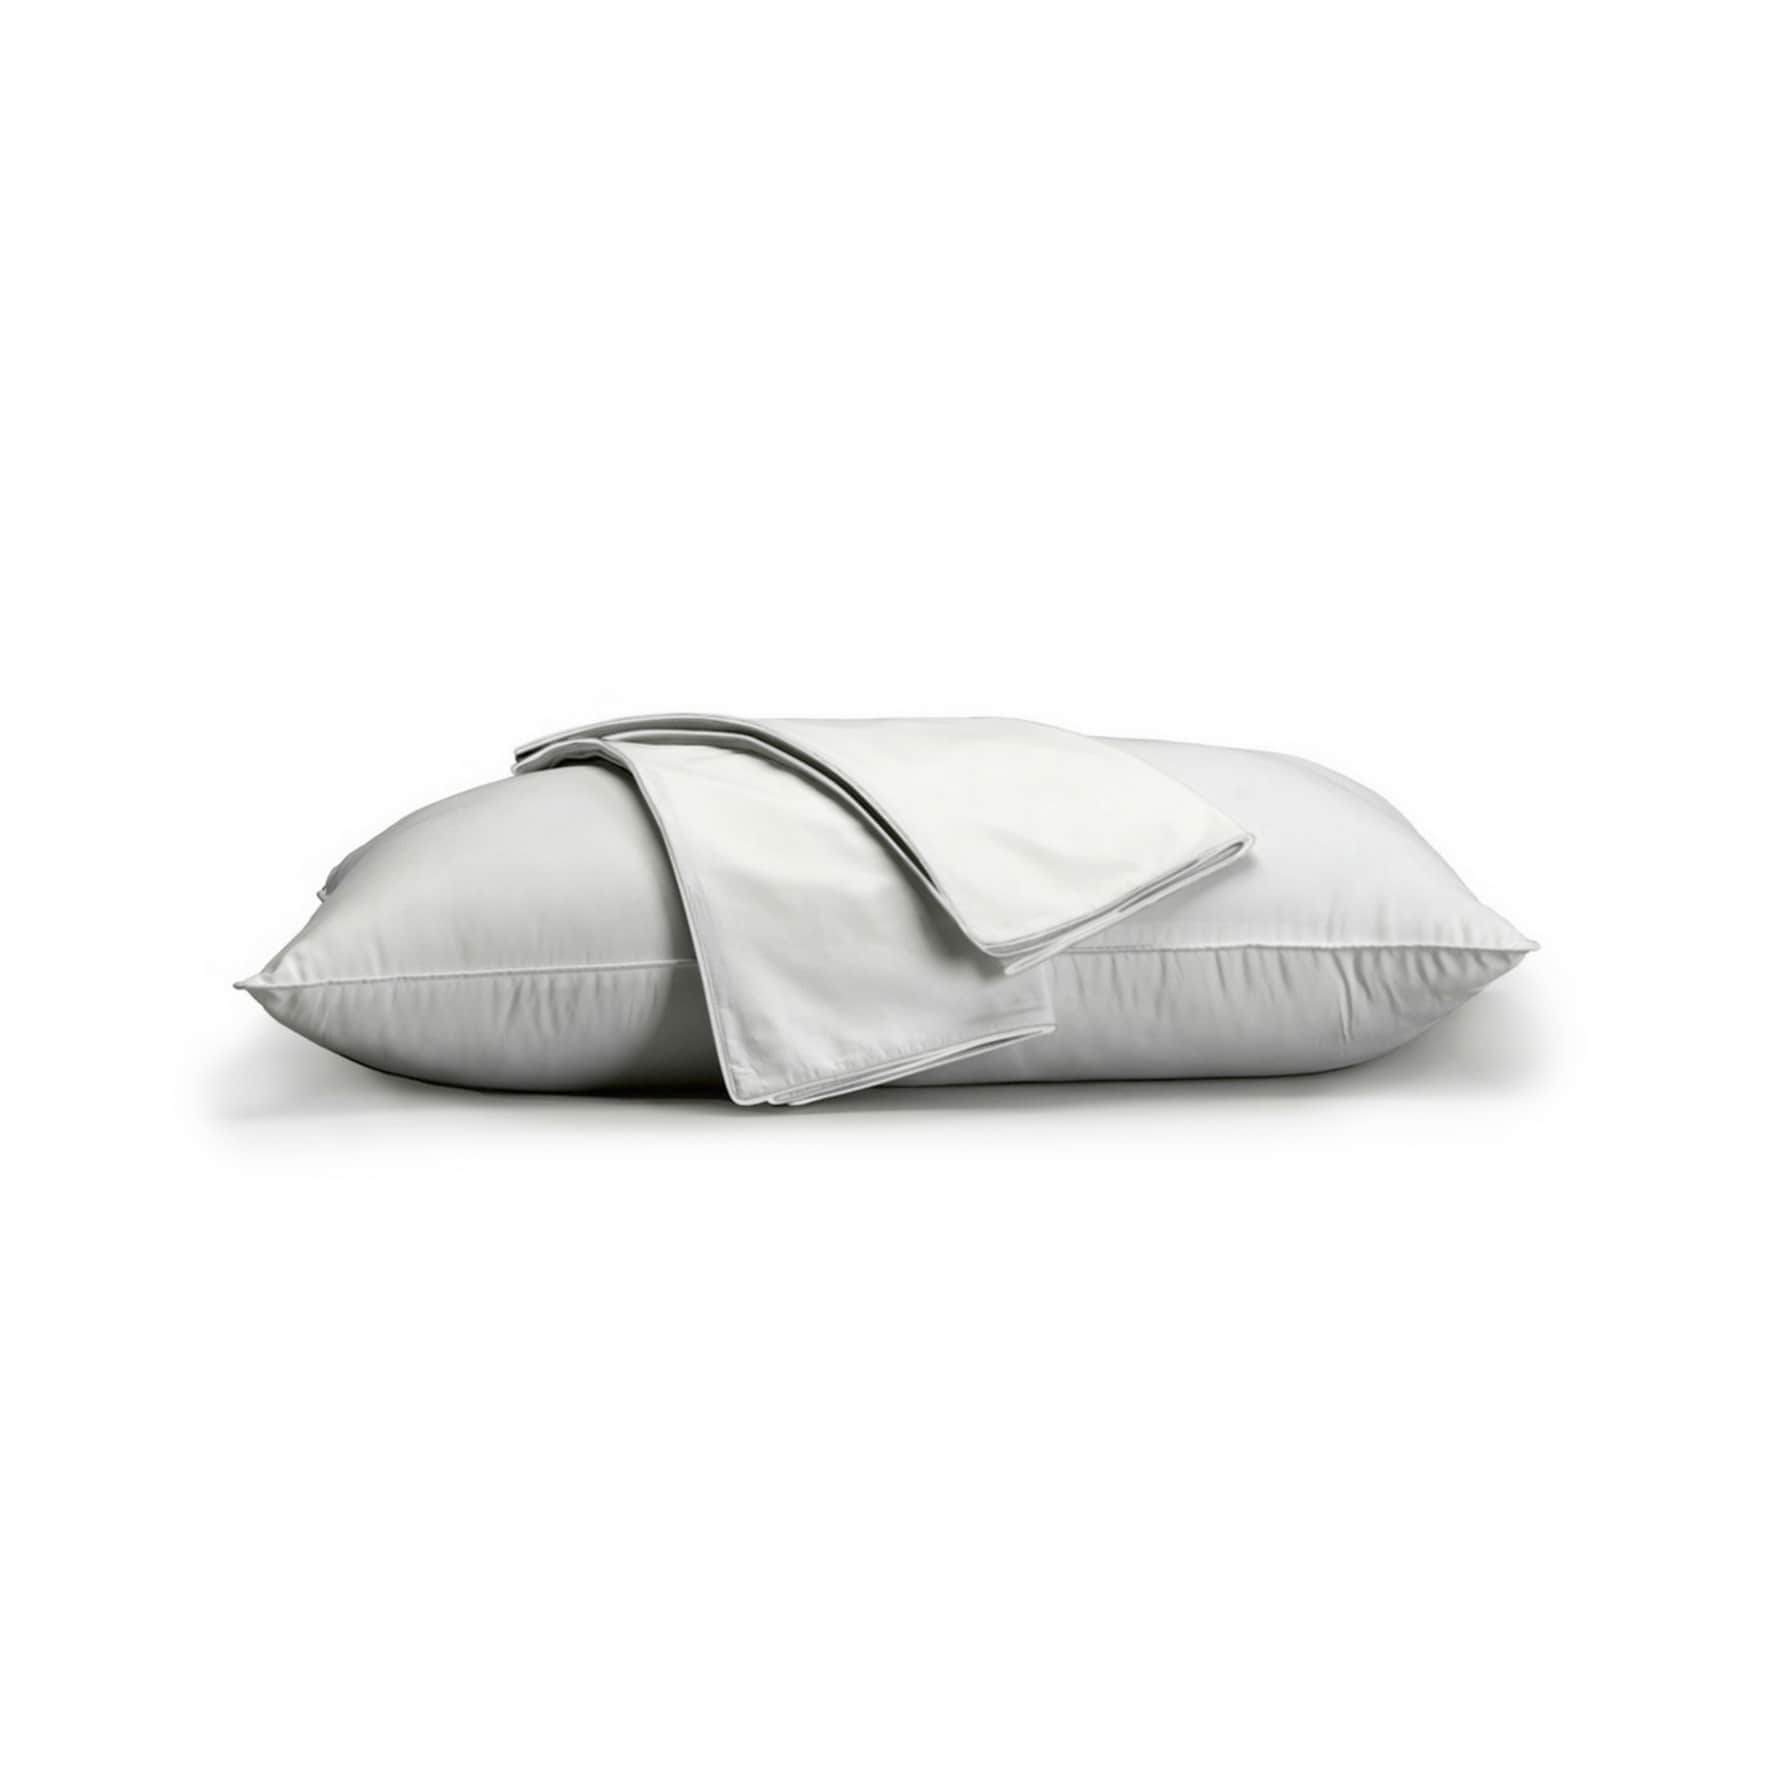 https://ak1.ostkcdn.com/images/products/is/images/direct/2ee15b080e42a07c7bc853b70f6bdd18ae7af37d/100%25-Cotton-Percale-Pillow-Protector%2C-Set-of-2.jpg